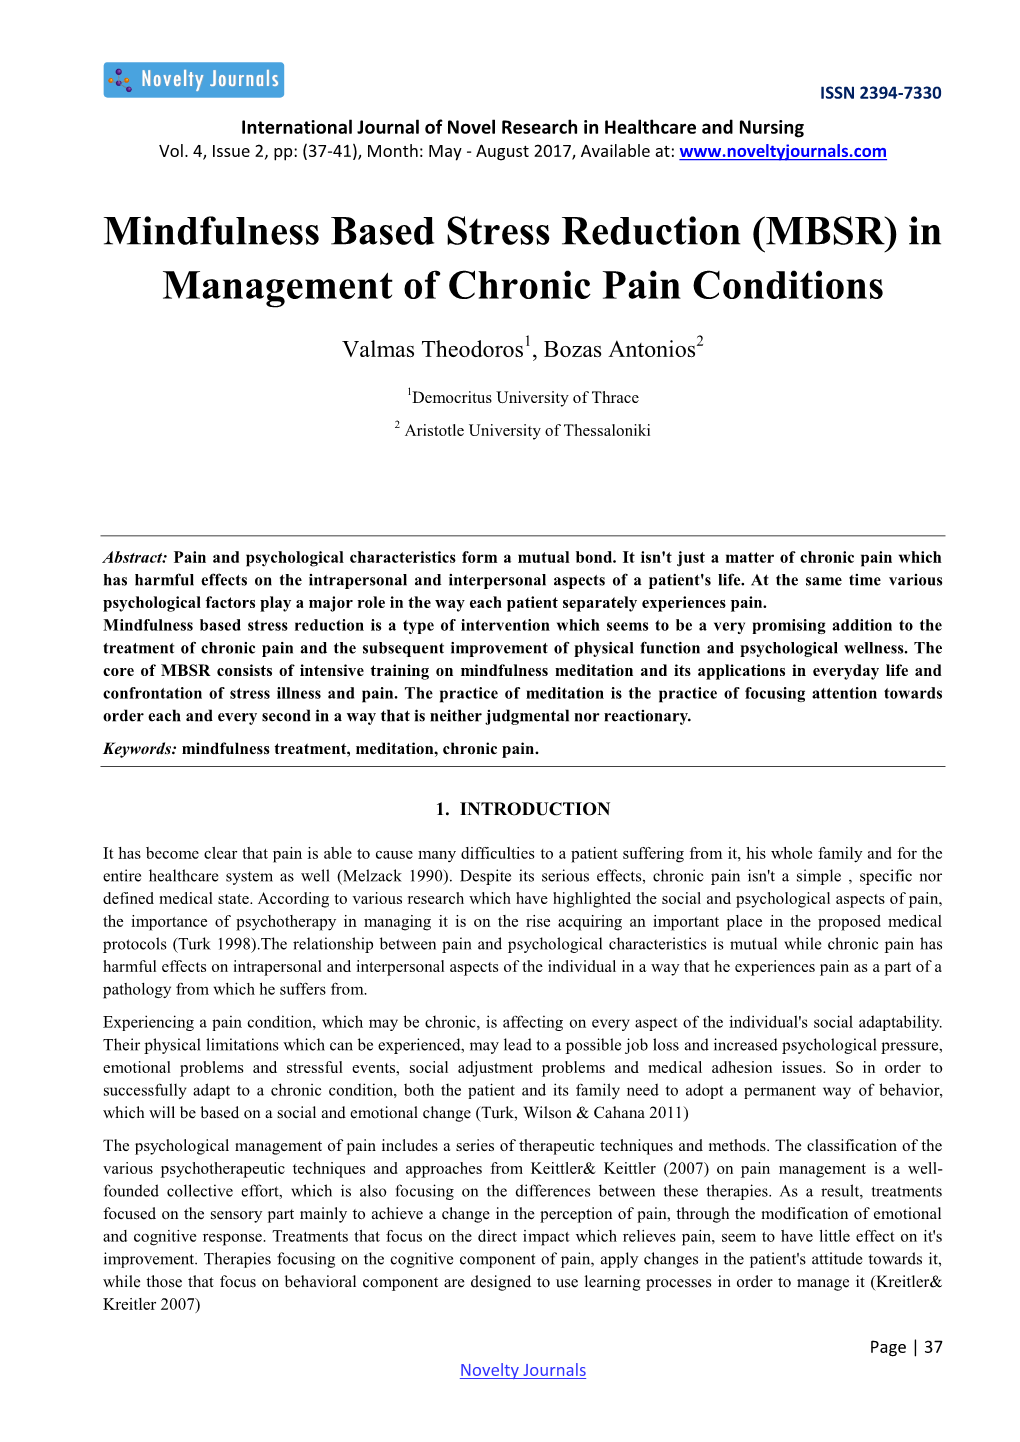 Mindfulness Based Stress Reduction (MBSR) in Management of Chronic Pain Conditions